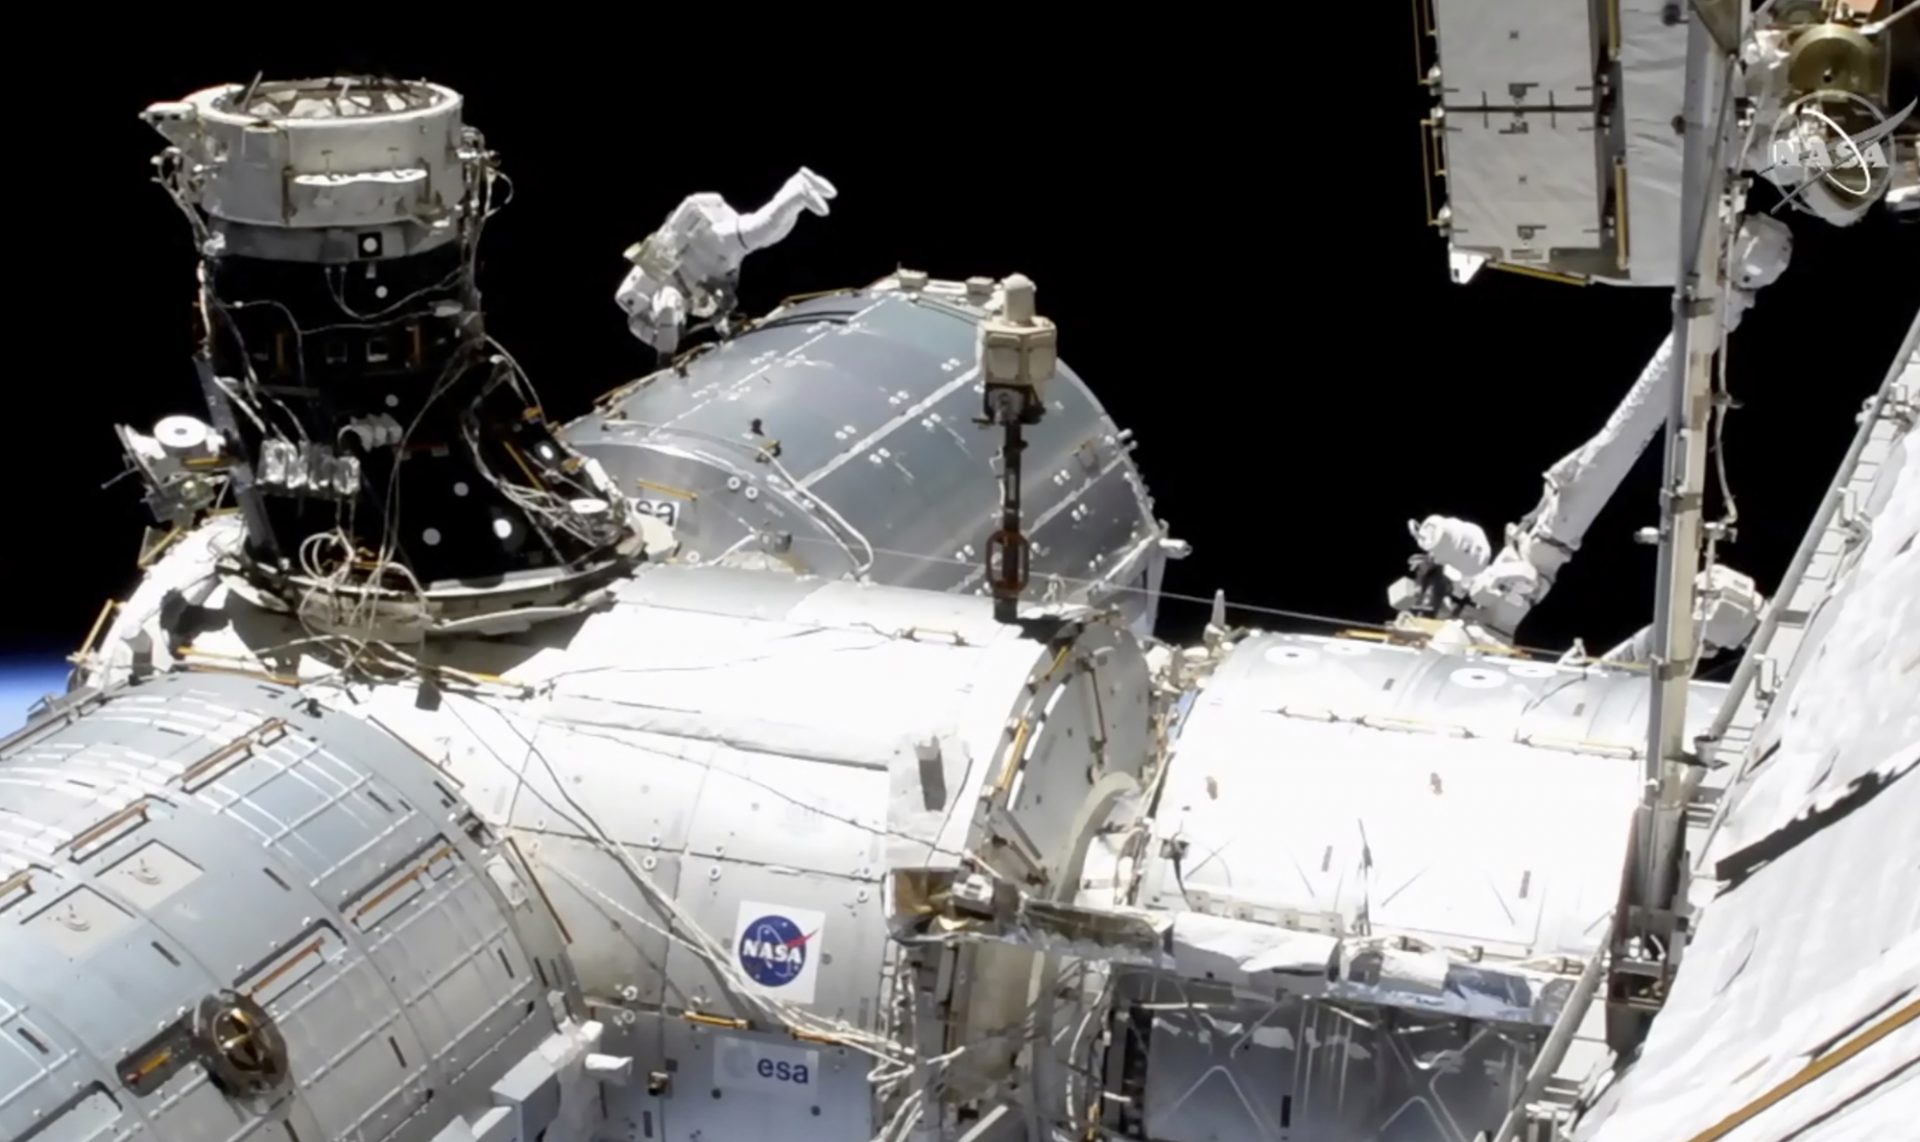 Cable effort dogs spacewalkers in European lab upgrades